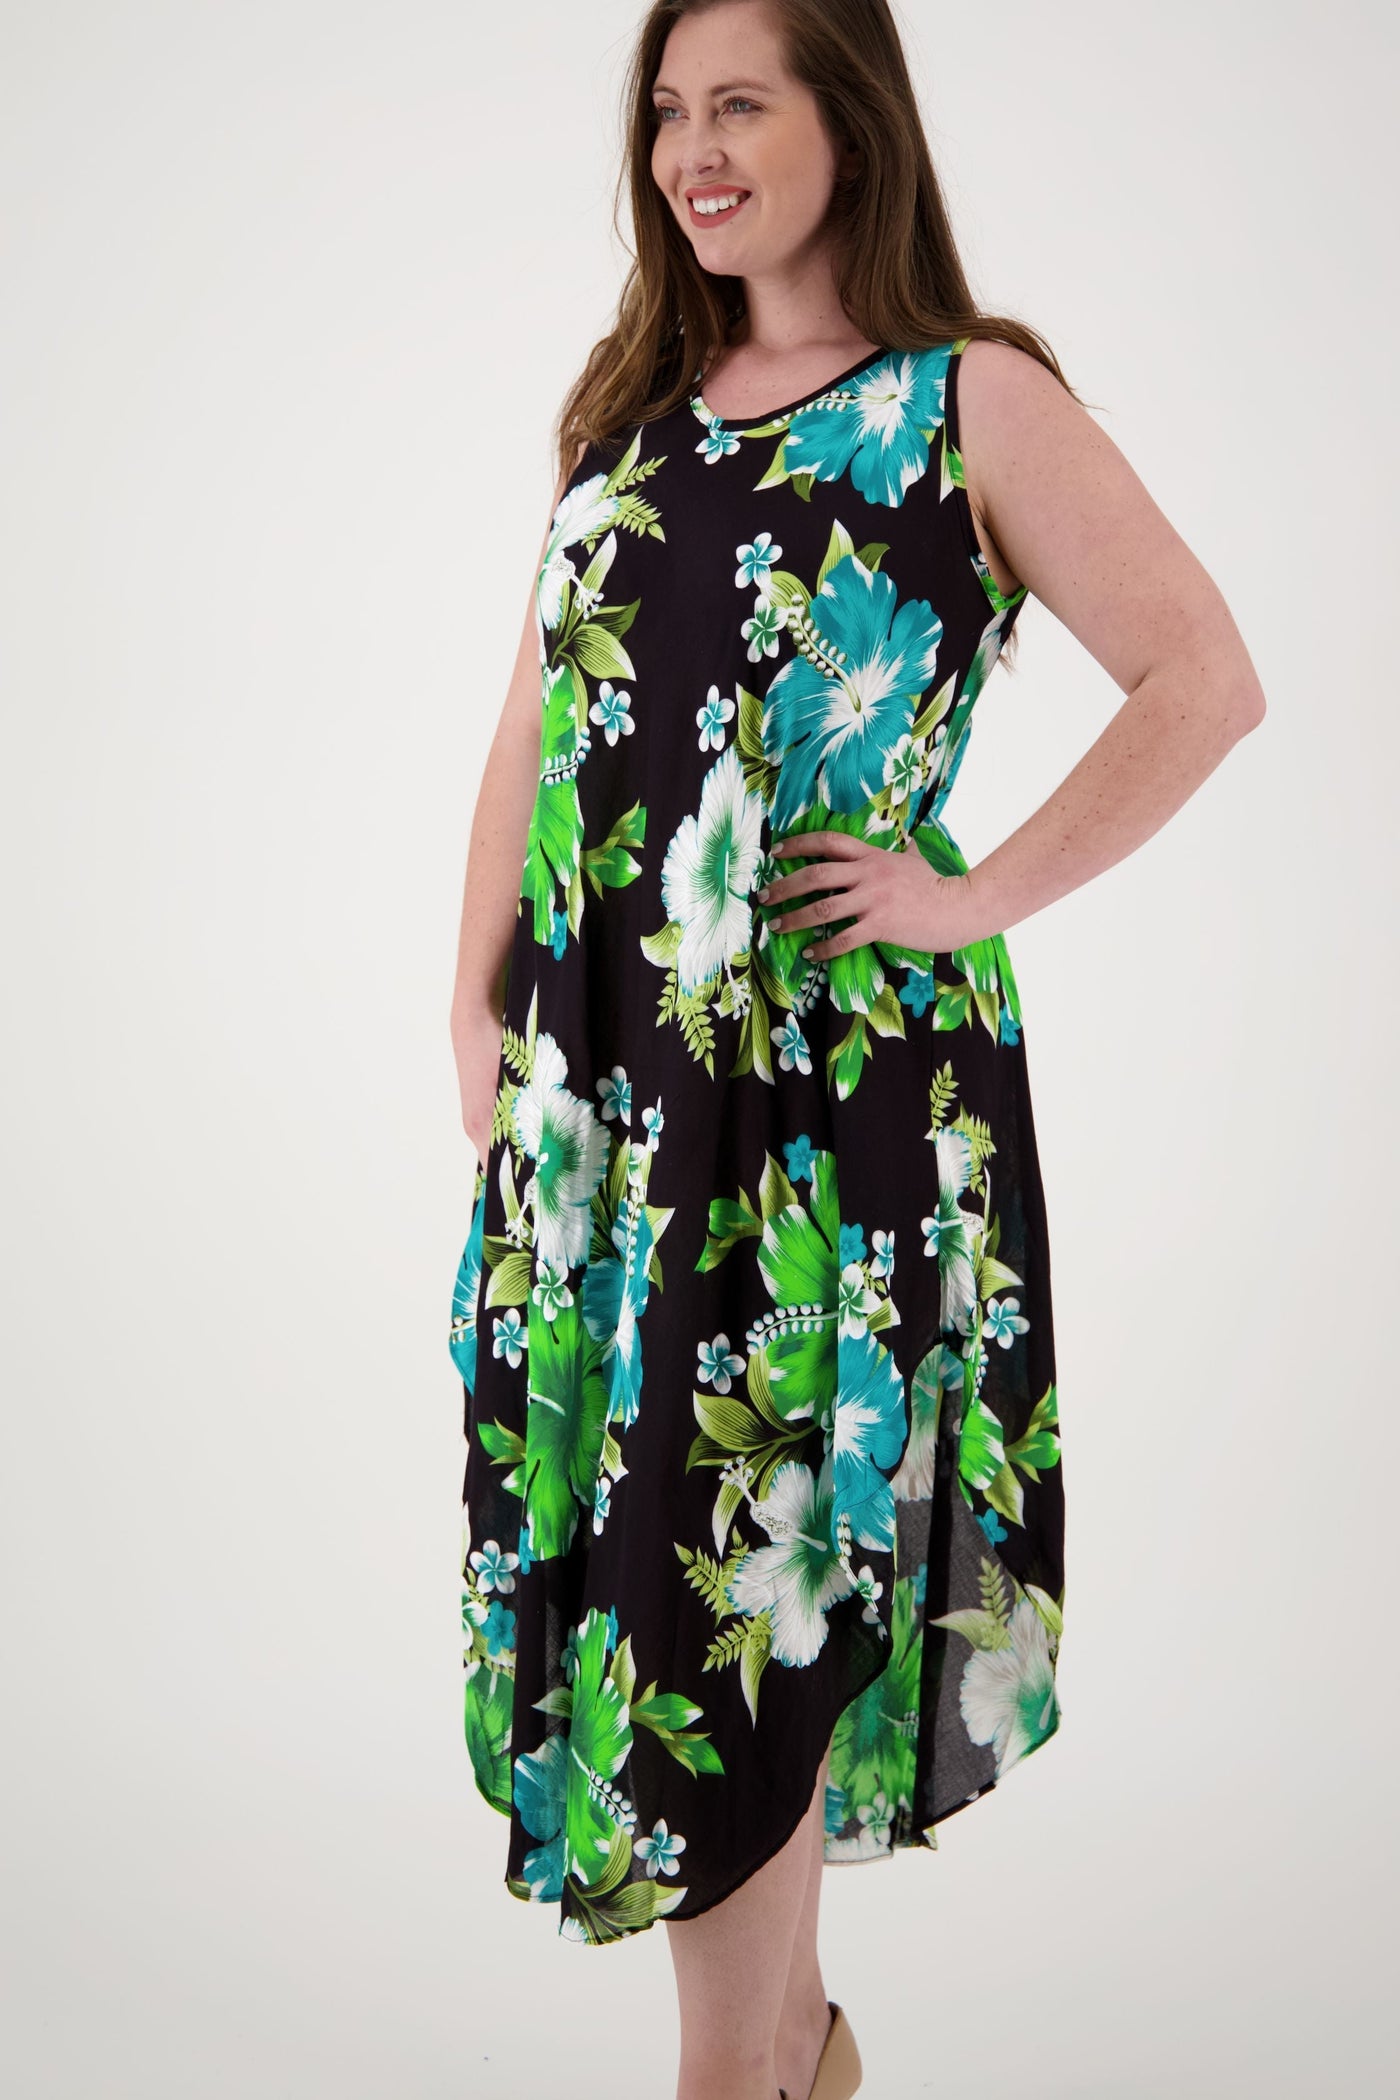 Floral Print Beach Dress One Size Fits Most TH-2501